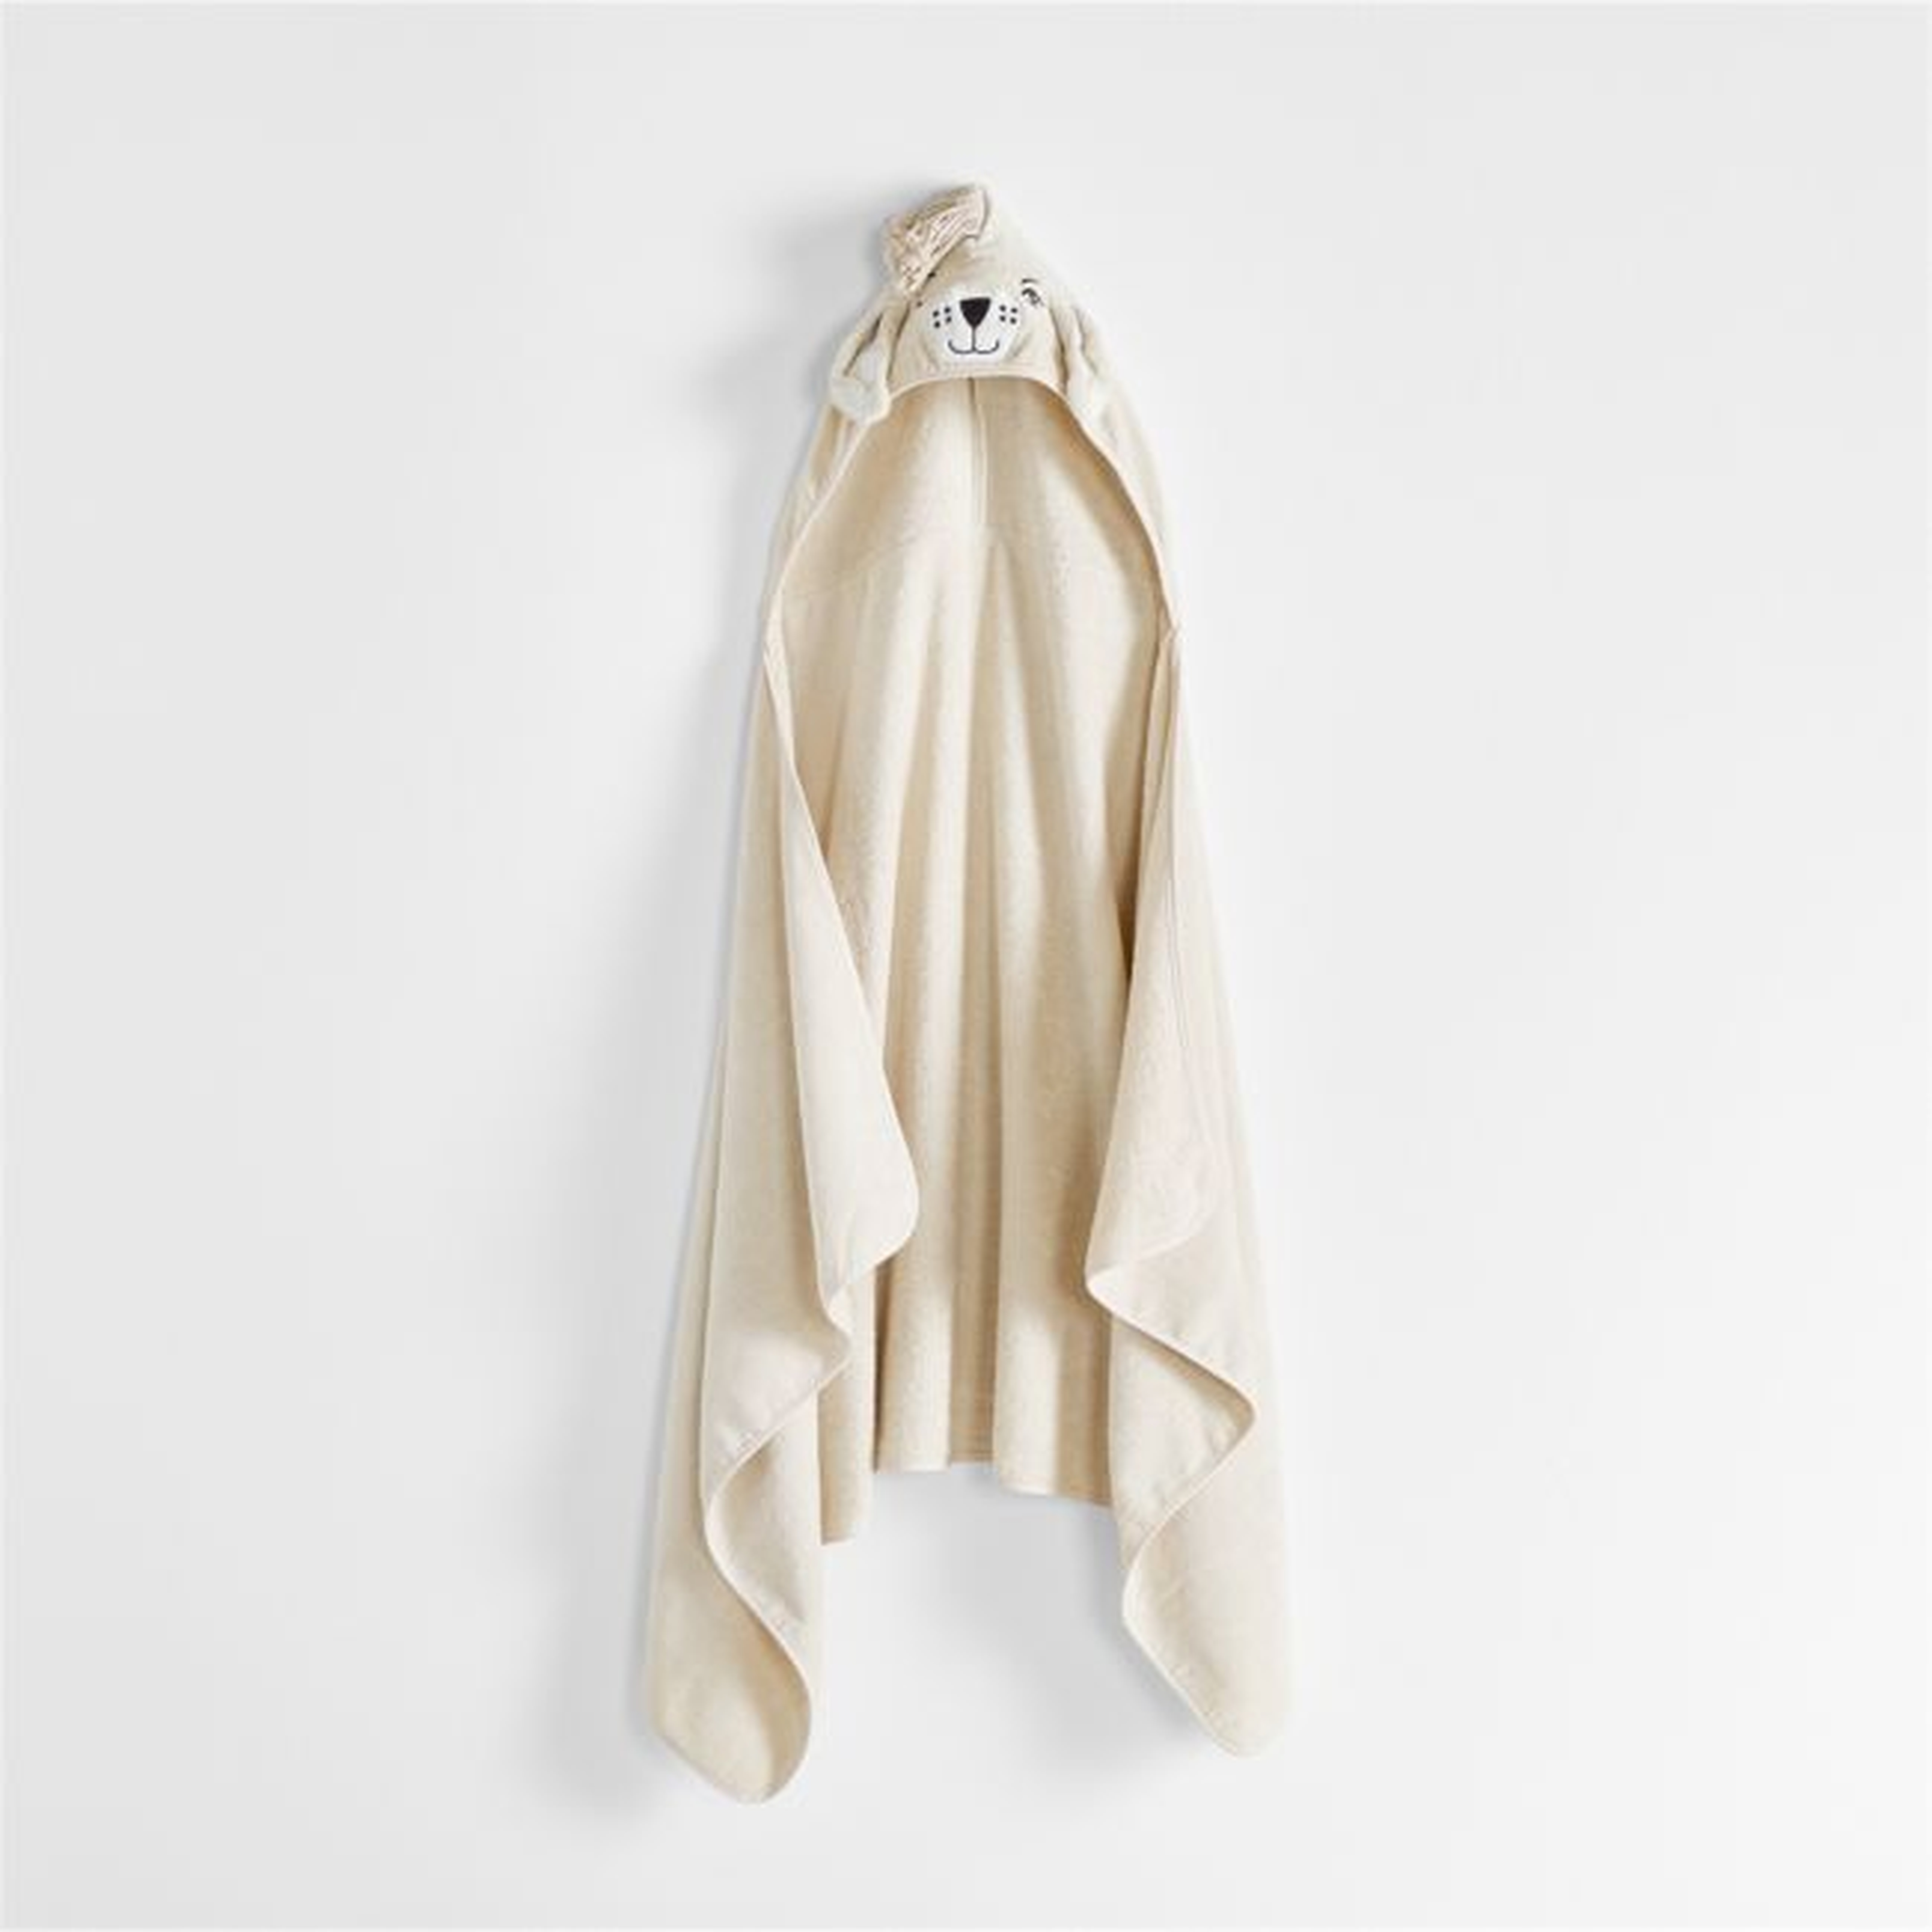 Dog Kids Hooded Towel - Crate and Barrel